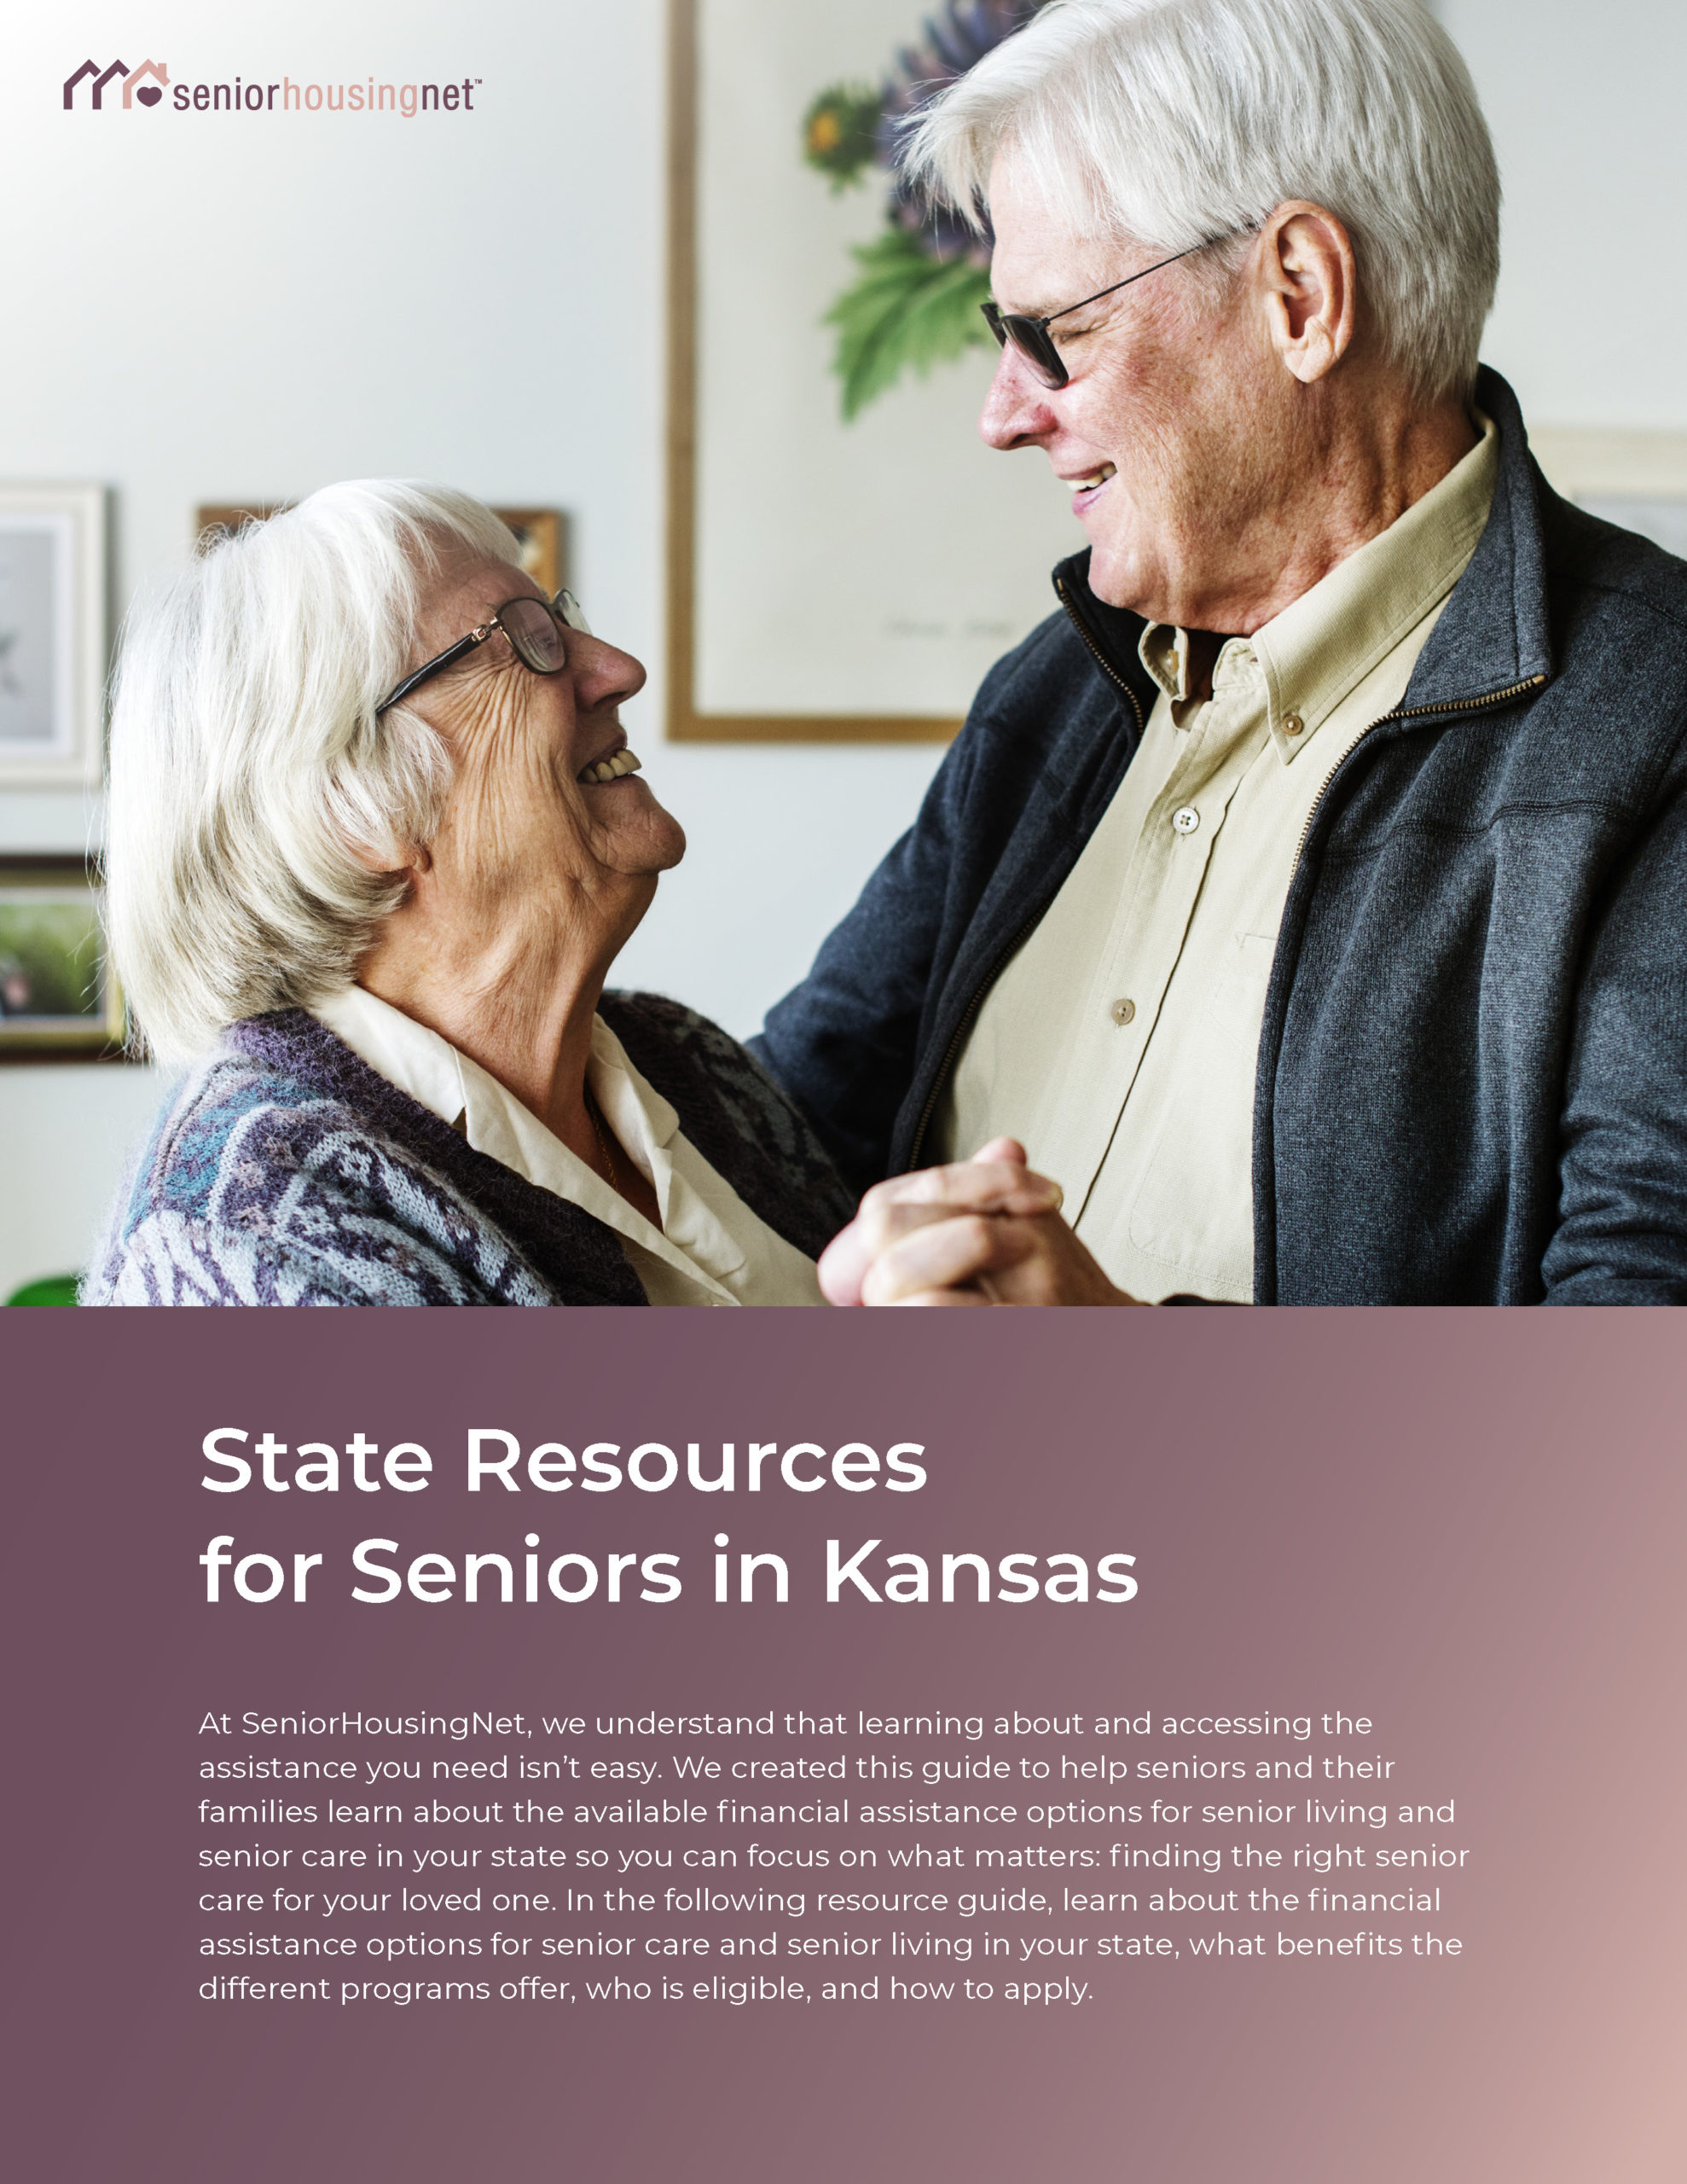 State Resources for Seniors in Kansas